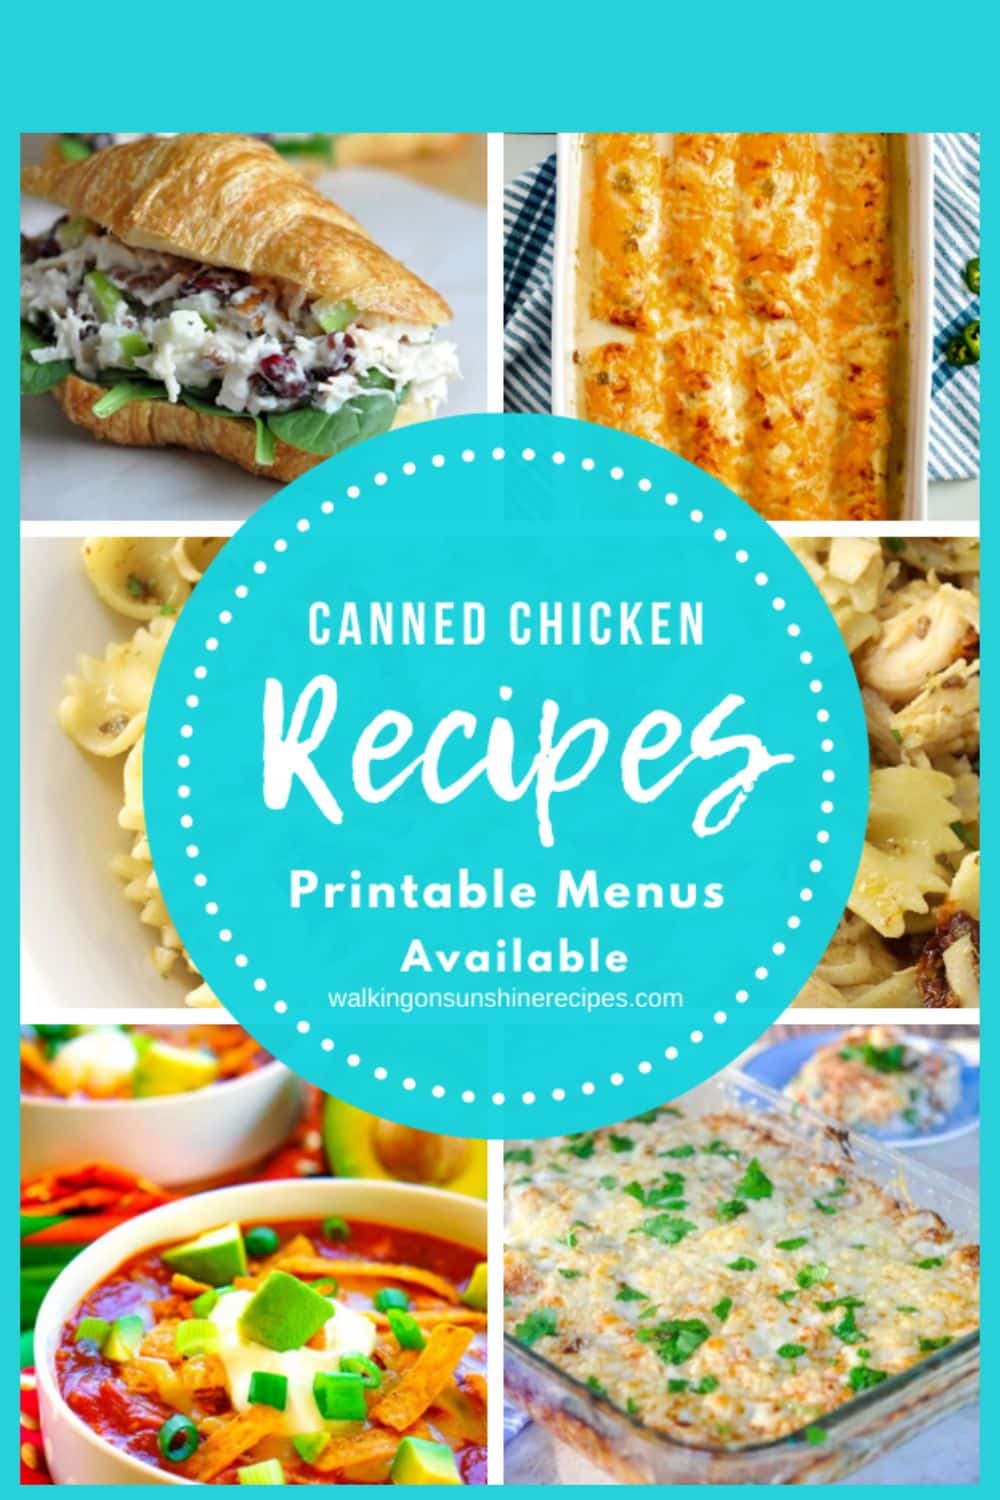 Canned Chicken Breast Recipes | Walking on Sunshine Recipes